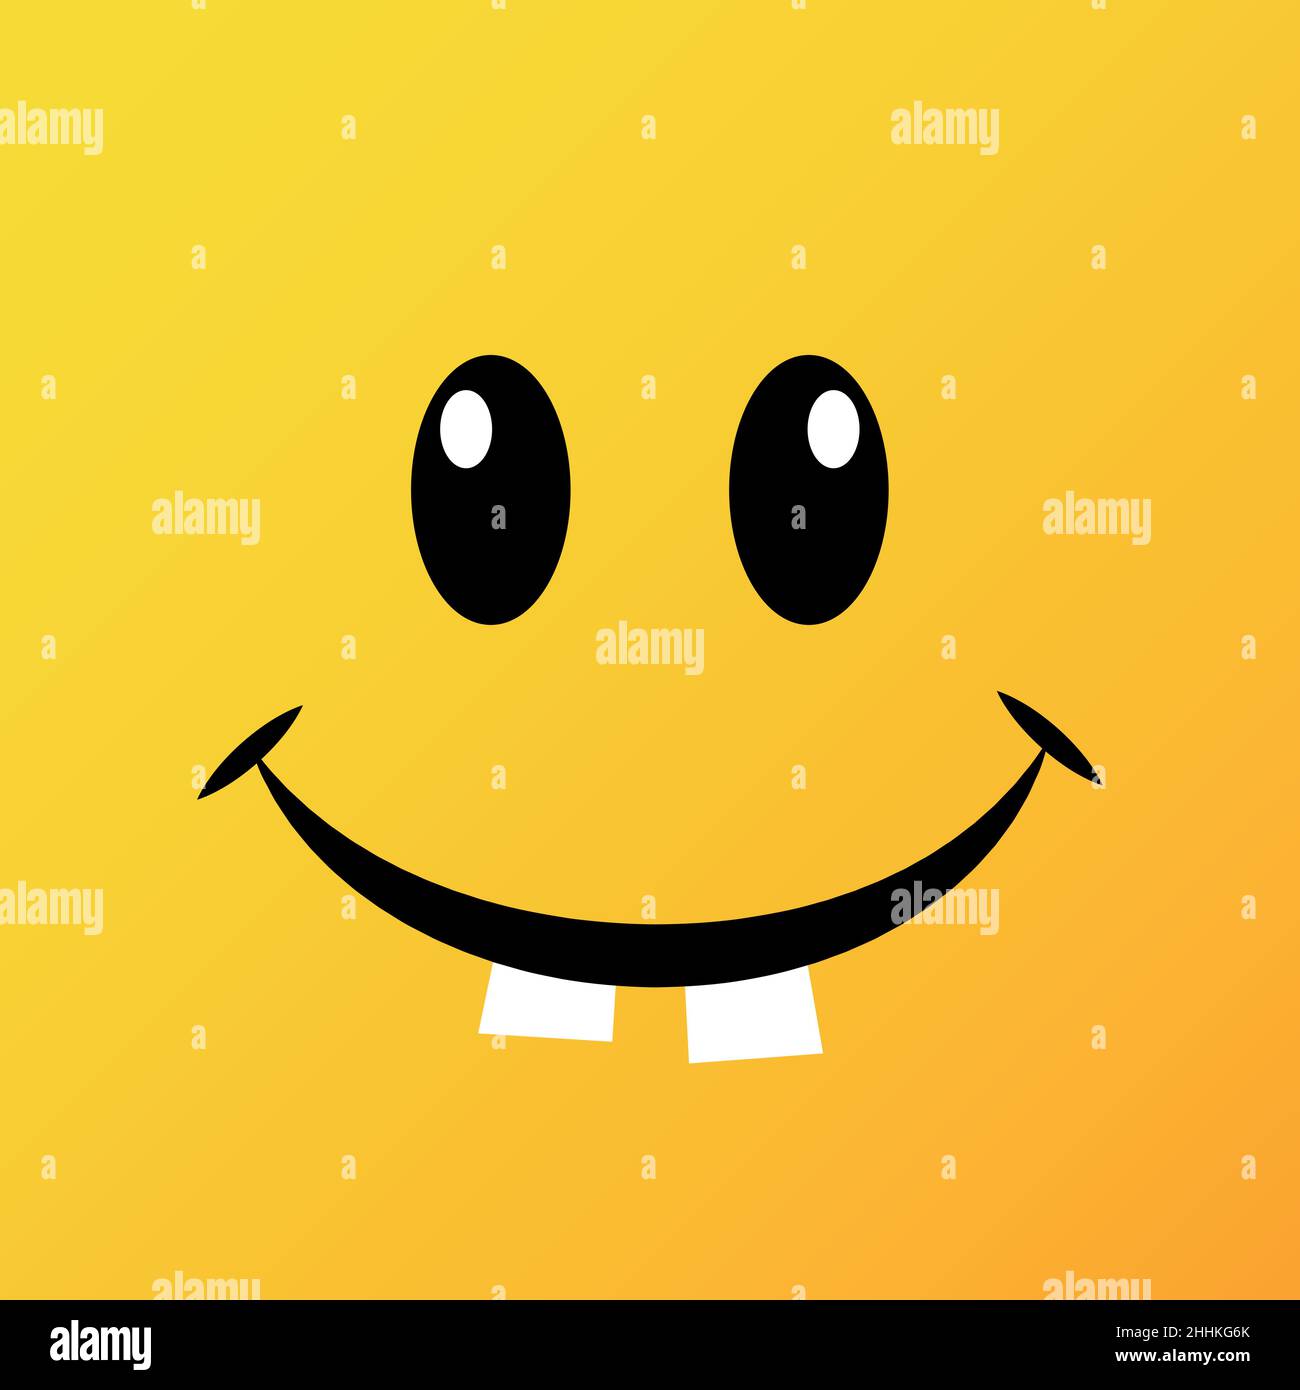 Yellow emoticons and emojis. Vector illustration in flat style close-up Stock Vector